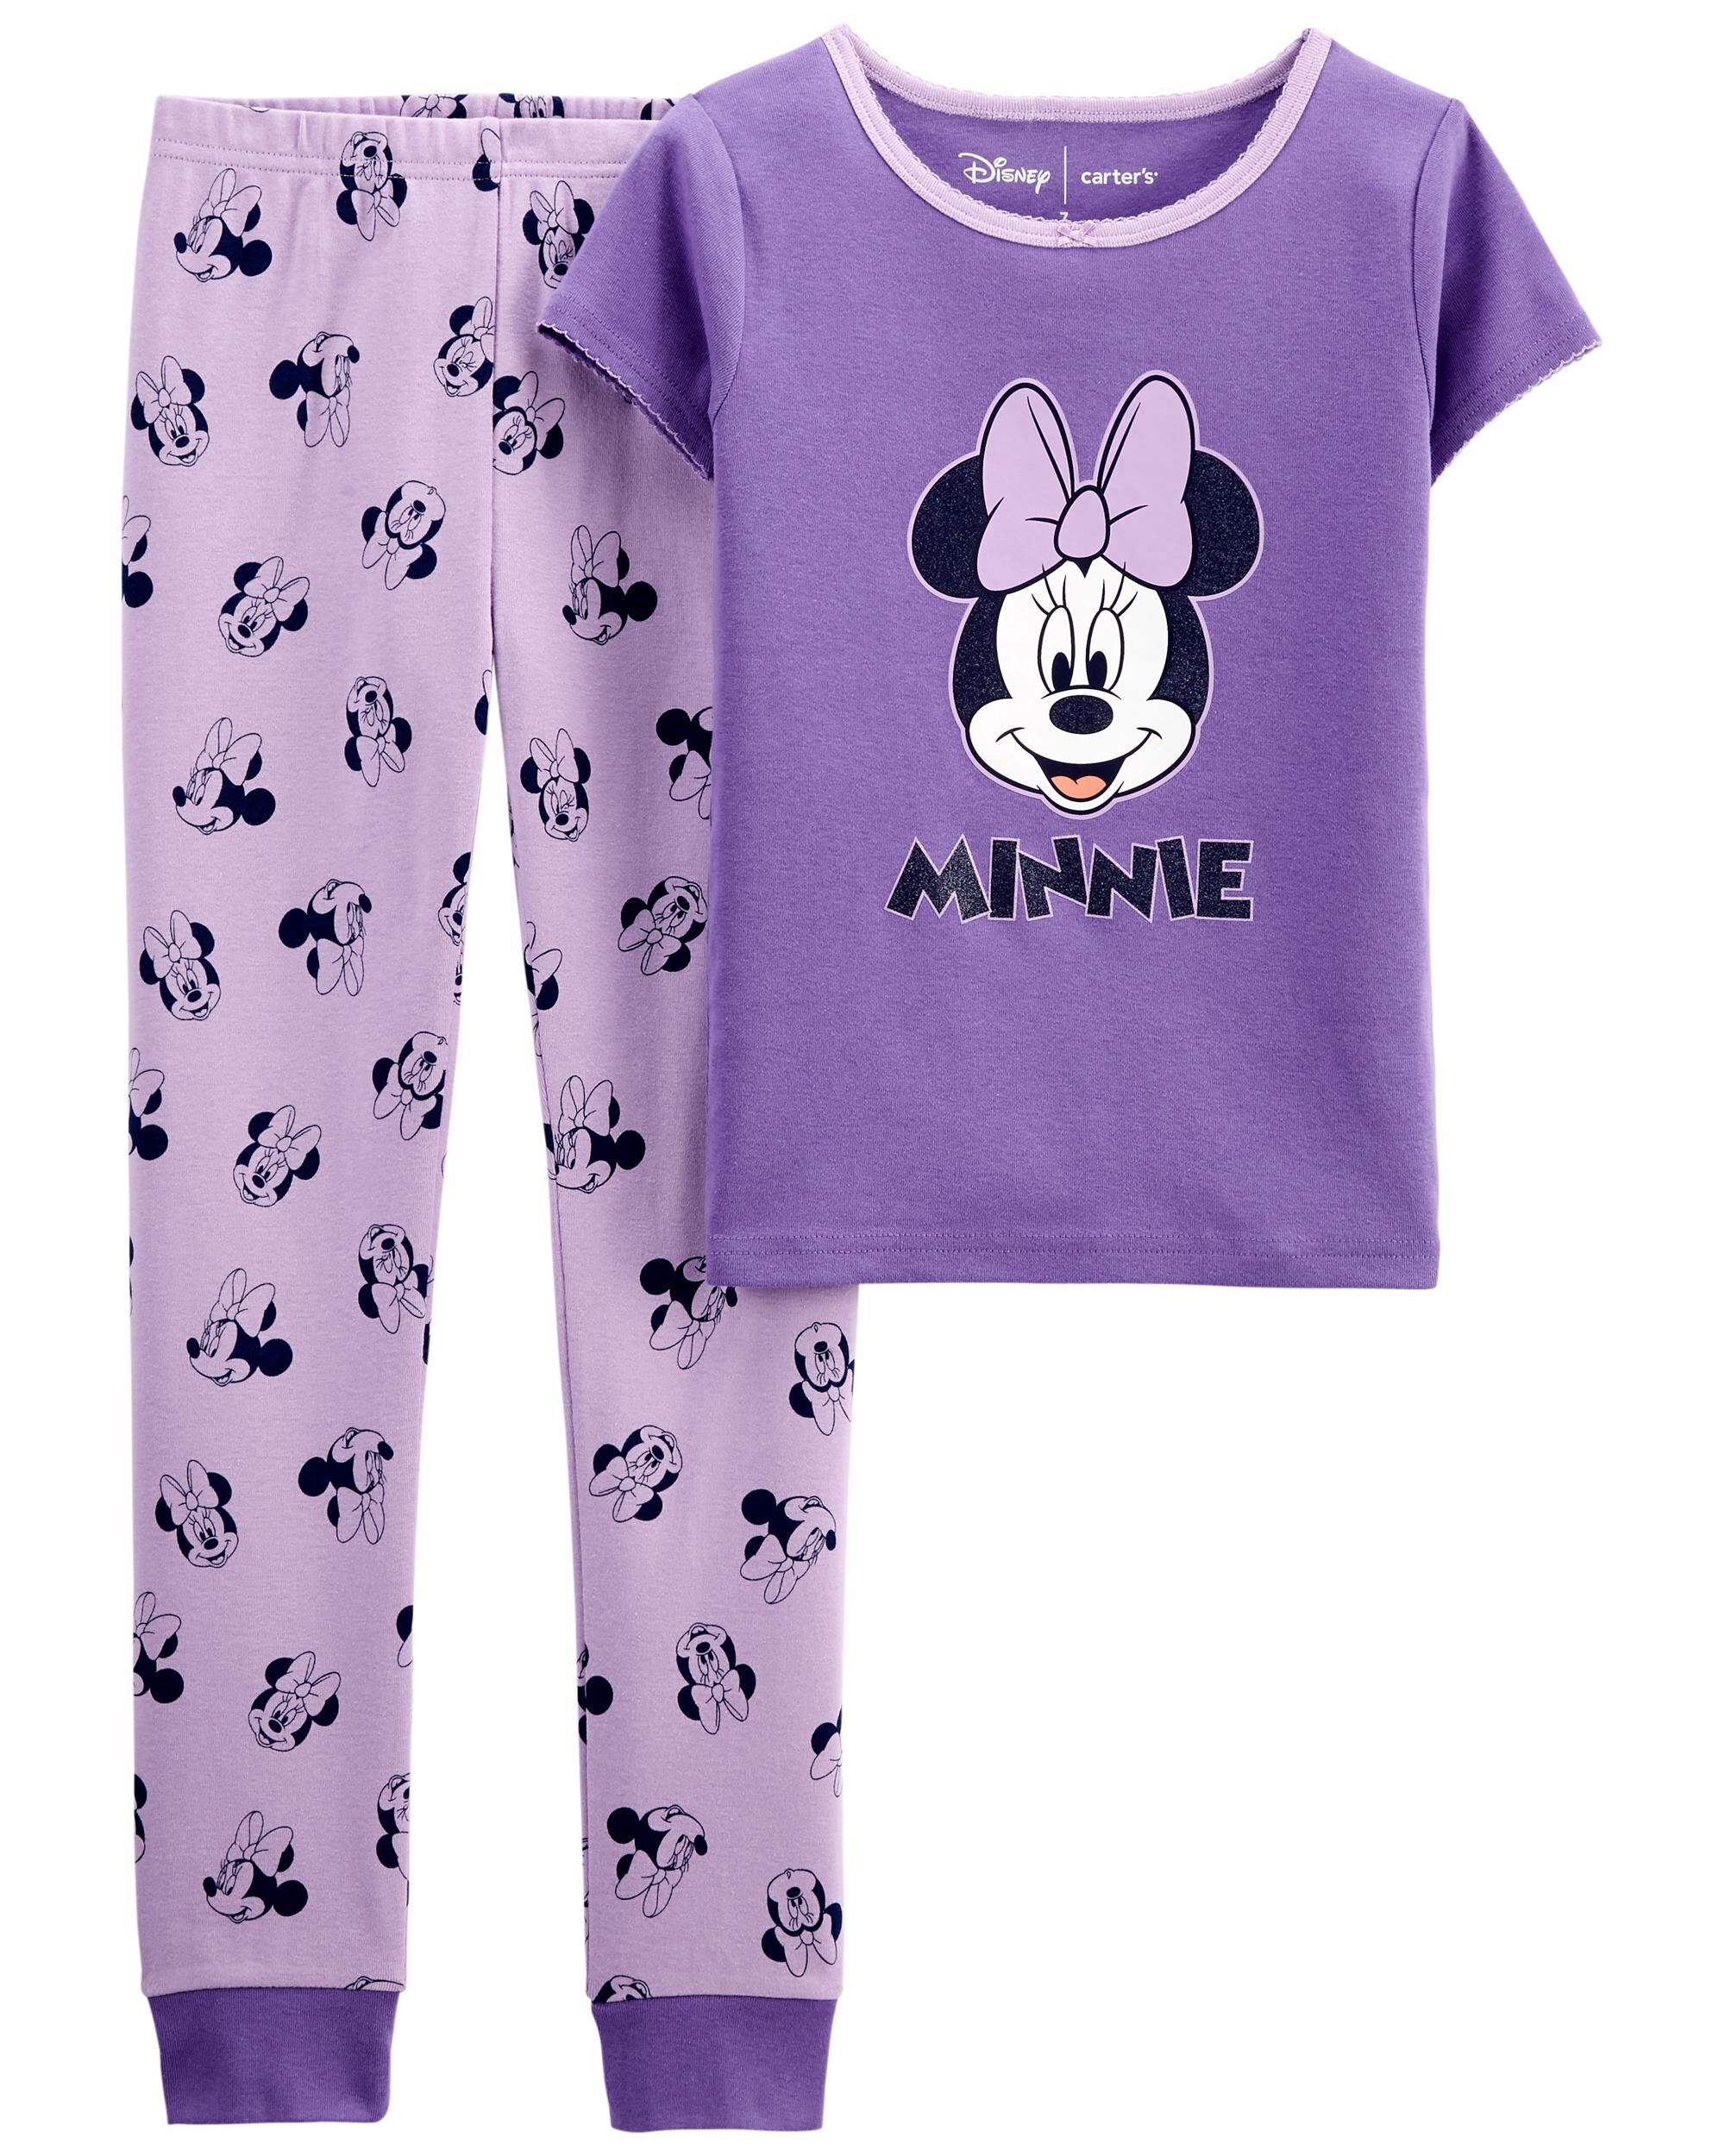 BNWT PURPLE MINNIE MOUSE GIRLS PYJAMAS 100% COTTON COSY AGES 3-8 YRS GORGEOUS! 